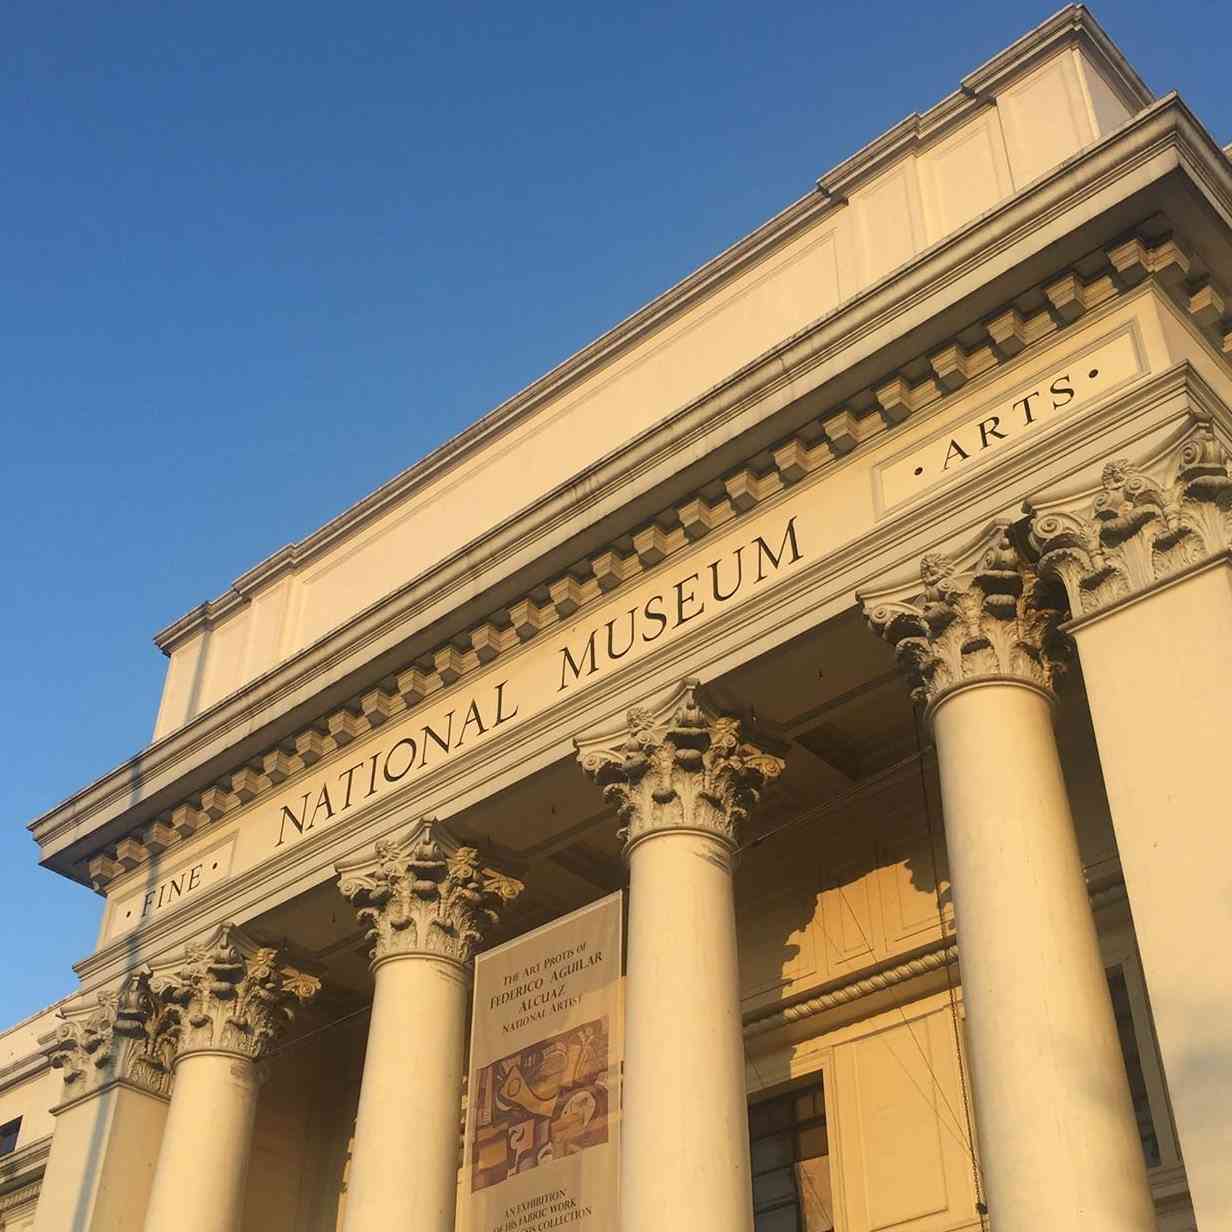 National Museum of Fine Arts to close from June 6 to July 4 for Marcos inauguration